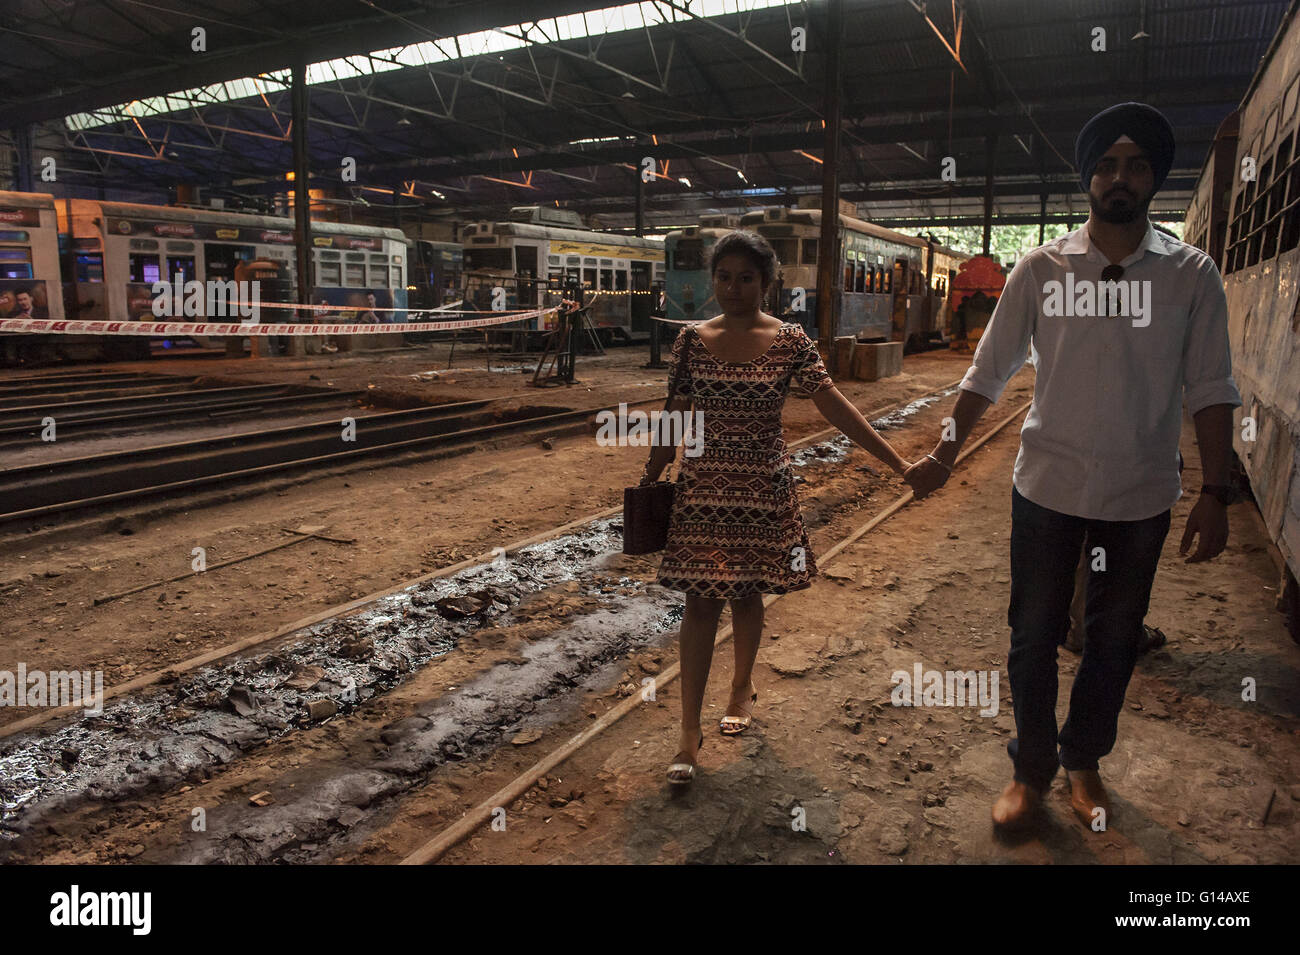 Kolkata, Indian state West Bengal. 8th May, 2016. A couple walk along a tram line during the two-day event Tram Tales at a tram depot in Kolkata, capital of eastern Indian state West Bengal, May 8, 2016. Tram Tales was planned as a unique mixed - media interactive visual installation piece using videos, music, photography, games, food and interaction to celebrate the nostalgia of trams as a symbol of Kolkata's rich colonial-era heritage. The event was held from May 7 to 8. © Tumpa Mondal/Xinhua/Alamy Live News Stock Photo